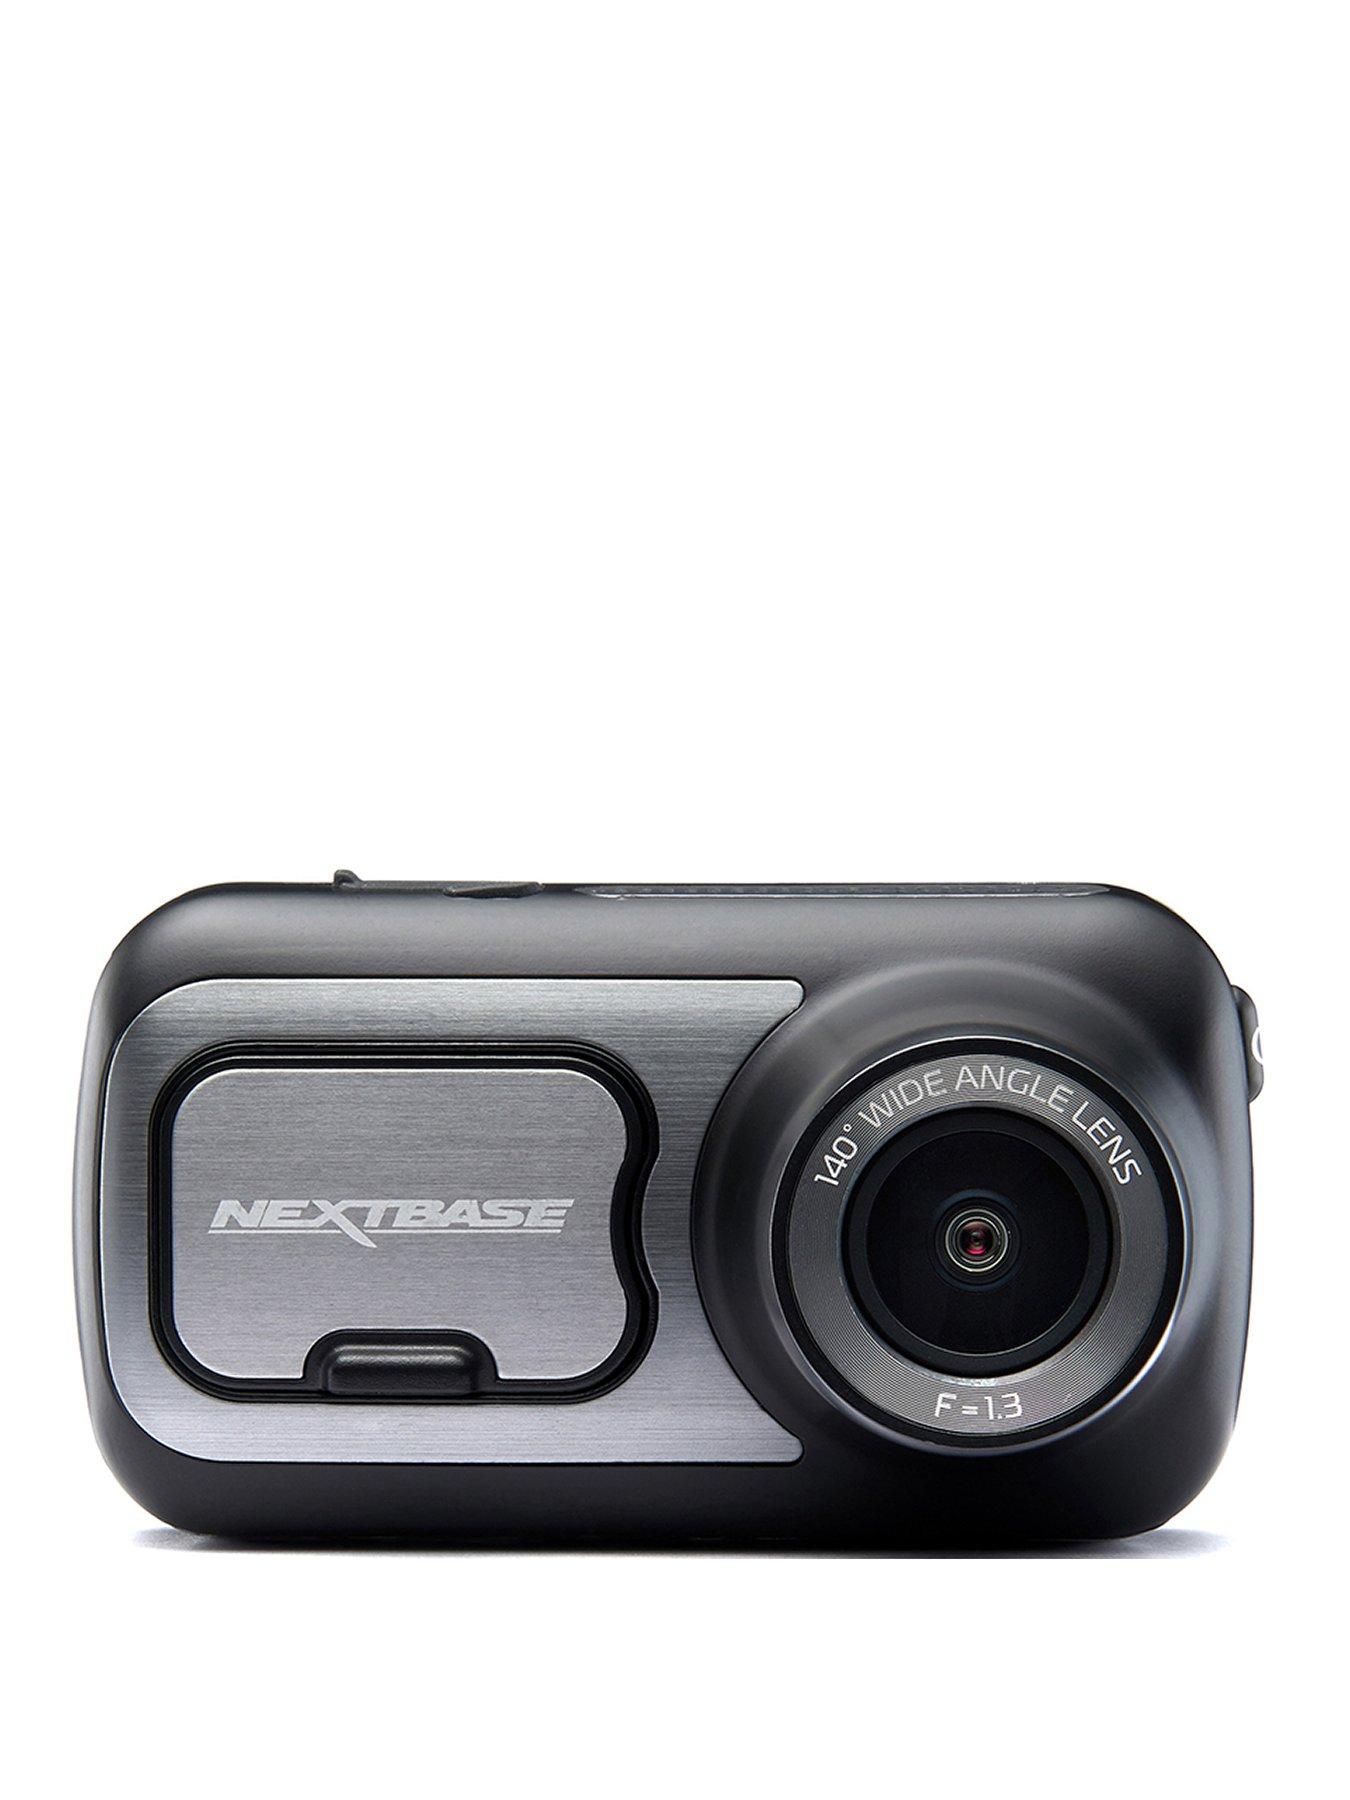 Type S S403 4K 60 Frames 60 FPS High Speed High Frame Rate Recording Dash Cam, Built-in Smart G-Sensor, Car Cam Park and Record, Wireless Video